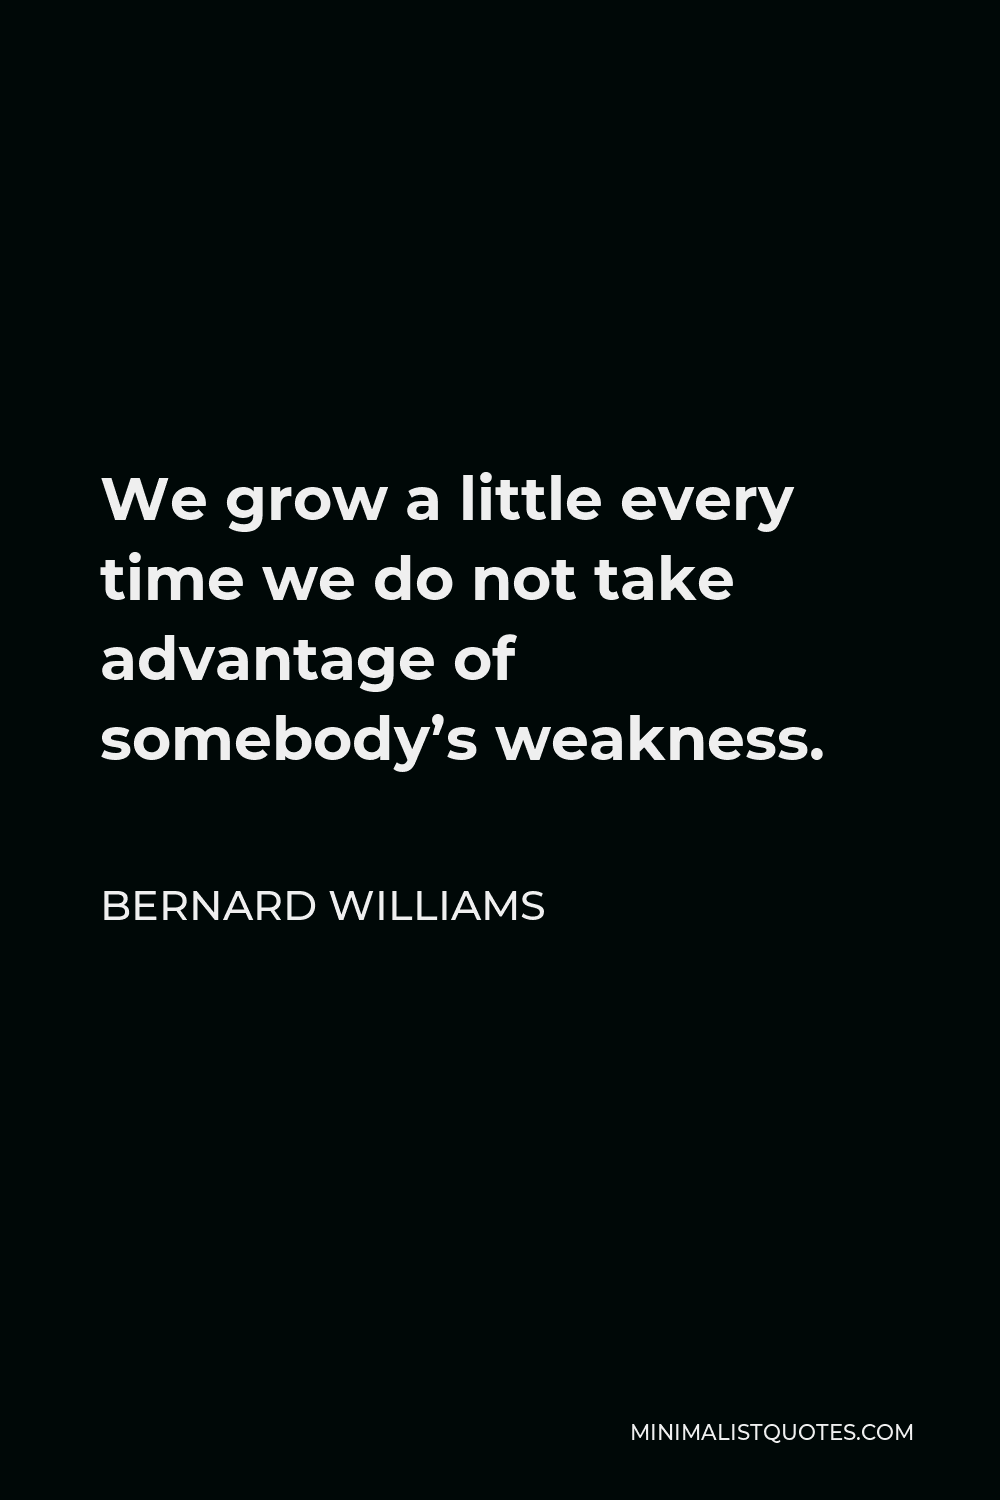 Bernard Williams Quote - We grow a little every time we do not take advantage of somebody’s weakness.